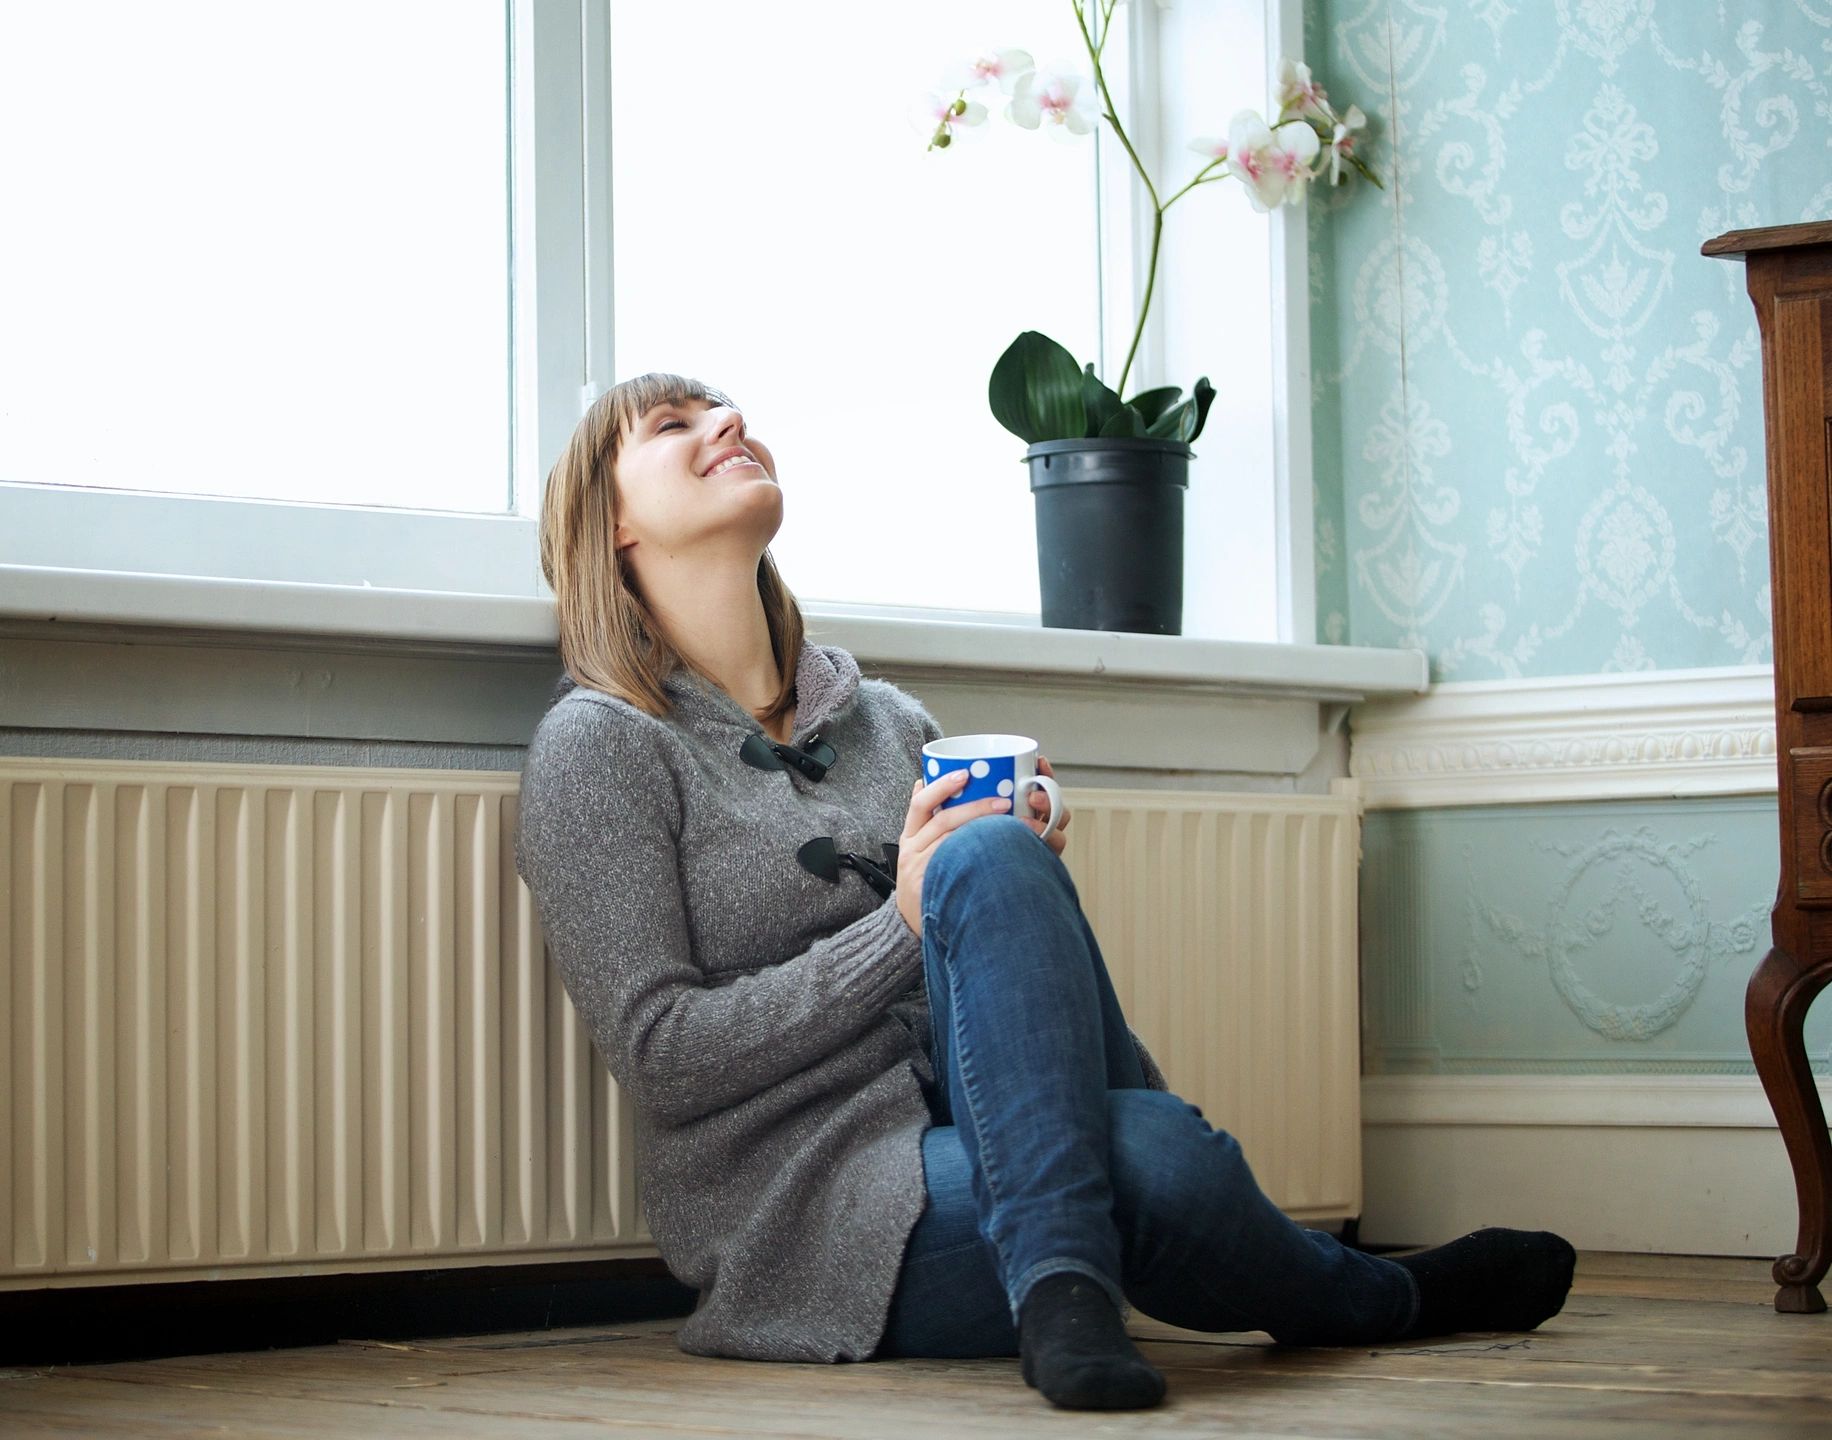 woman relaxed and smiling, sitting on the floor, against the radiator, flower pot on window sill 